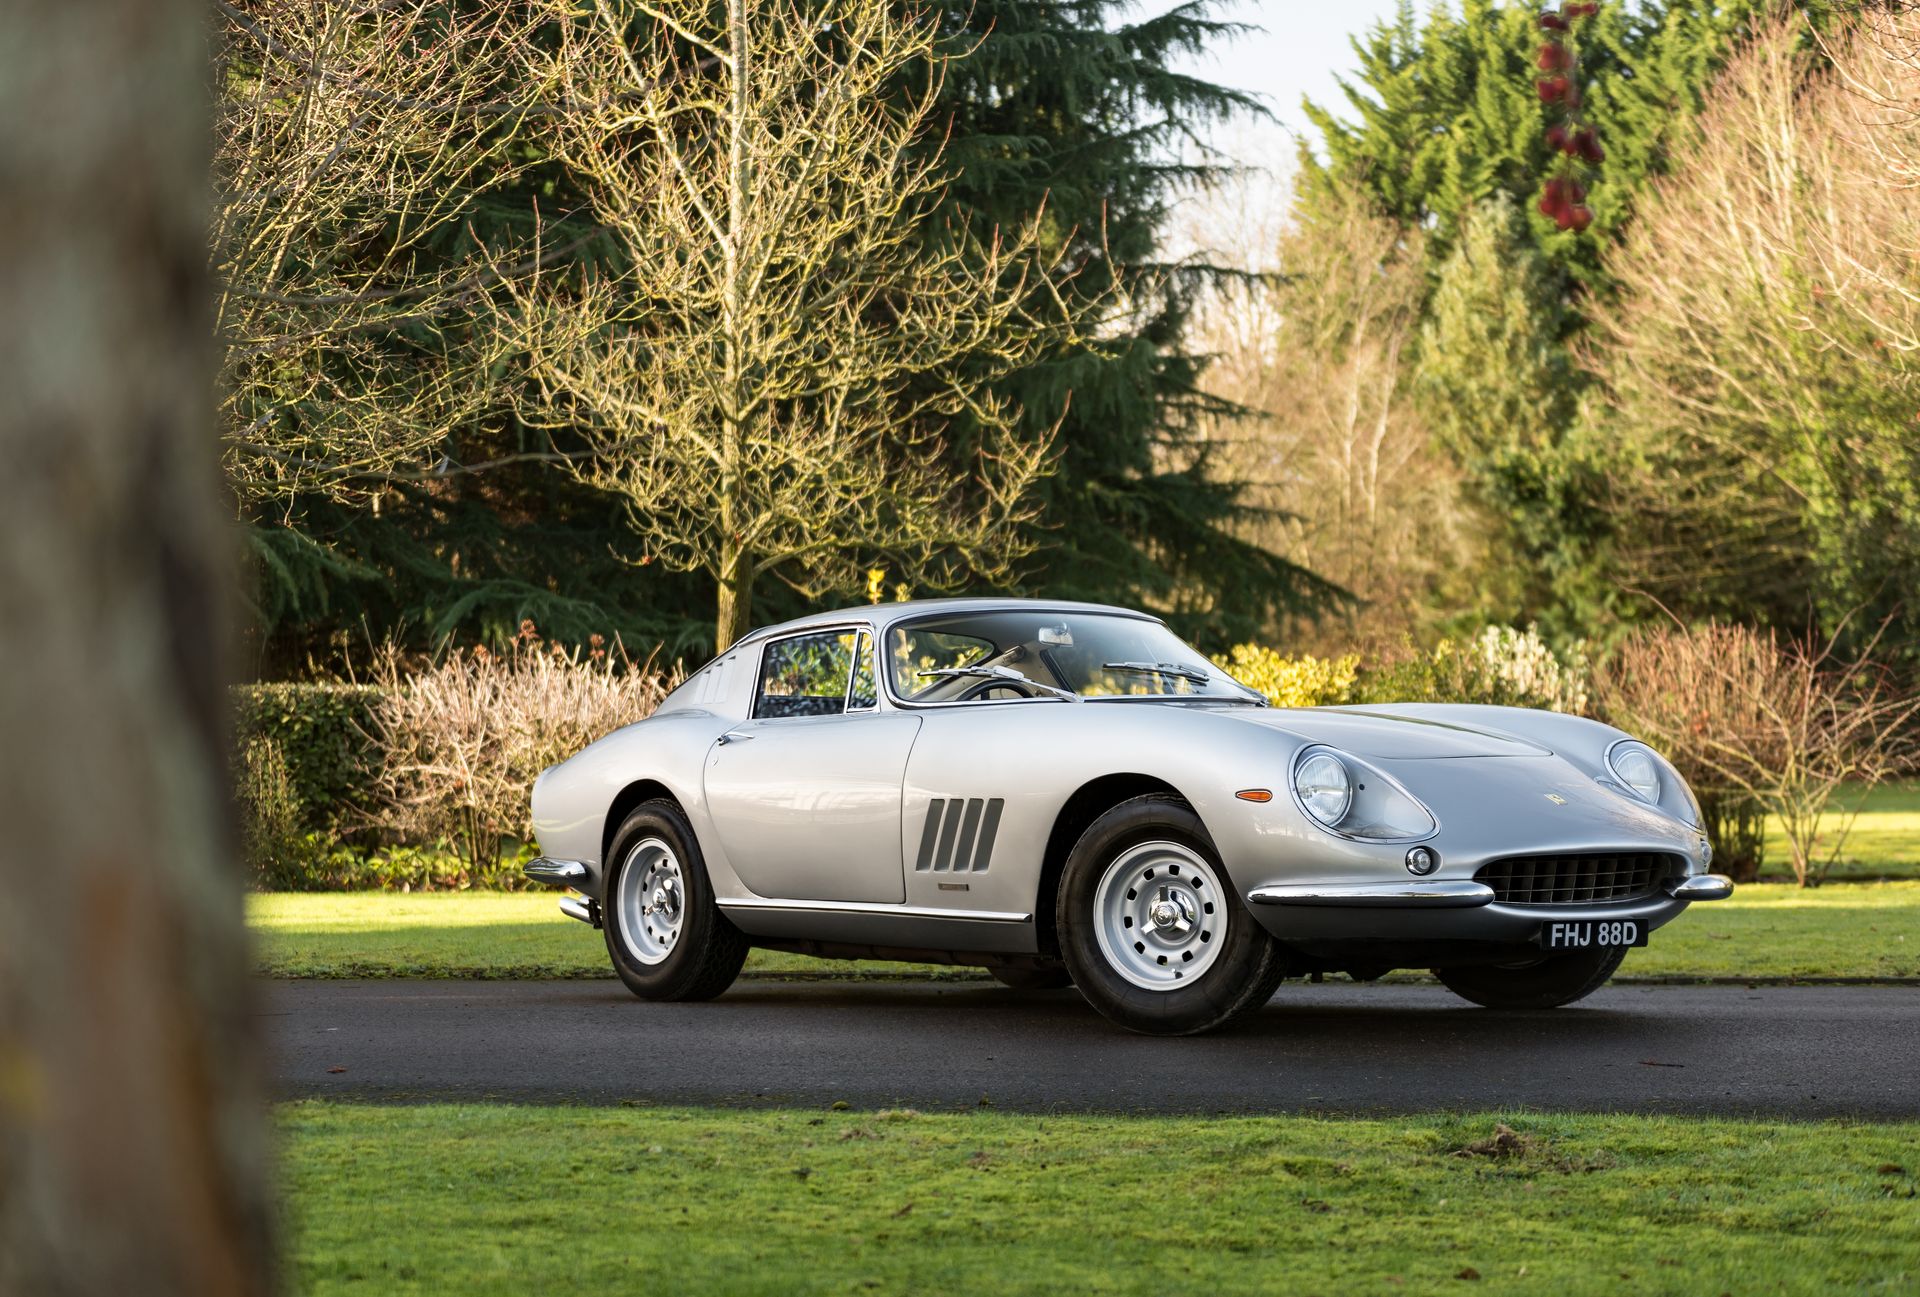 An argento 275 GTB on the driveway at GTO House